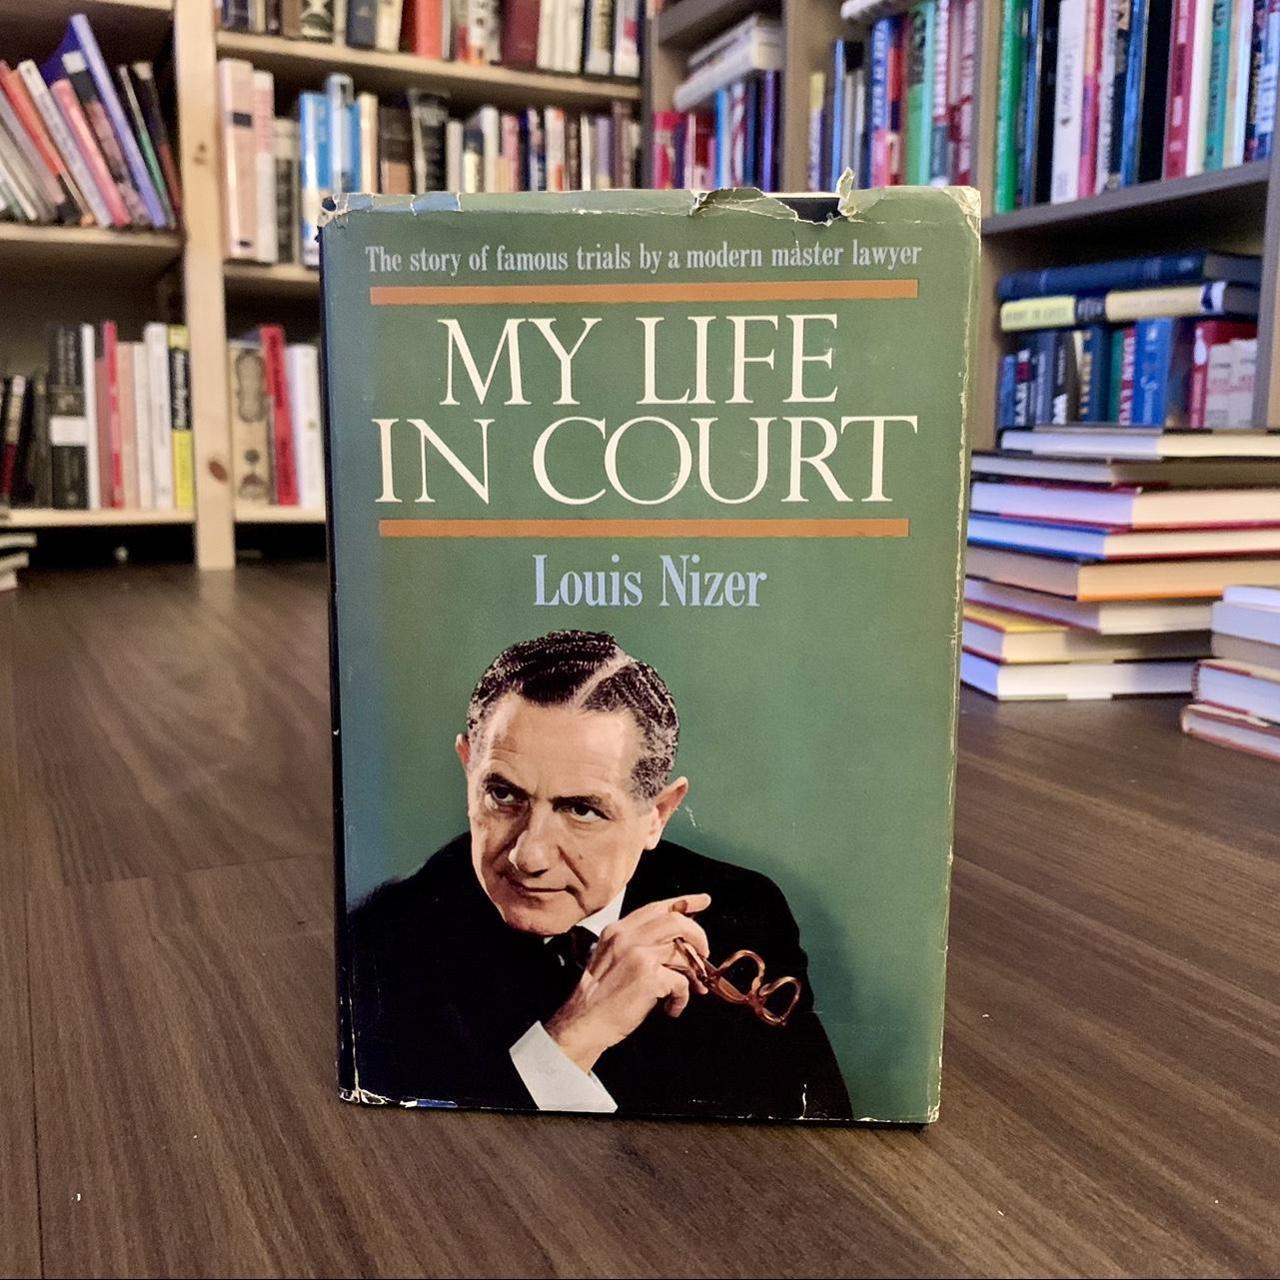 my life in court by louis nizer